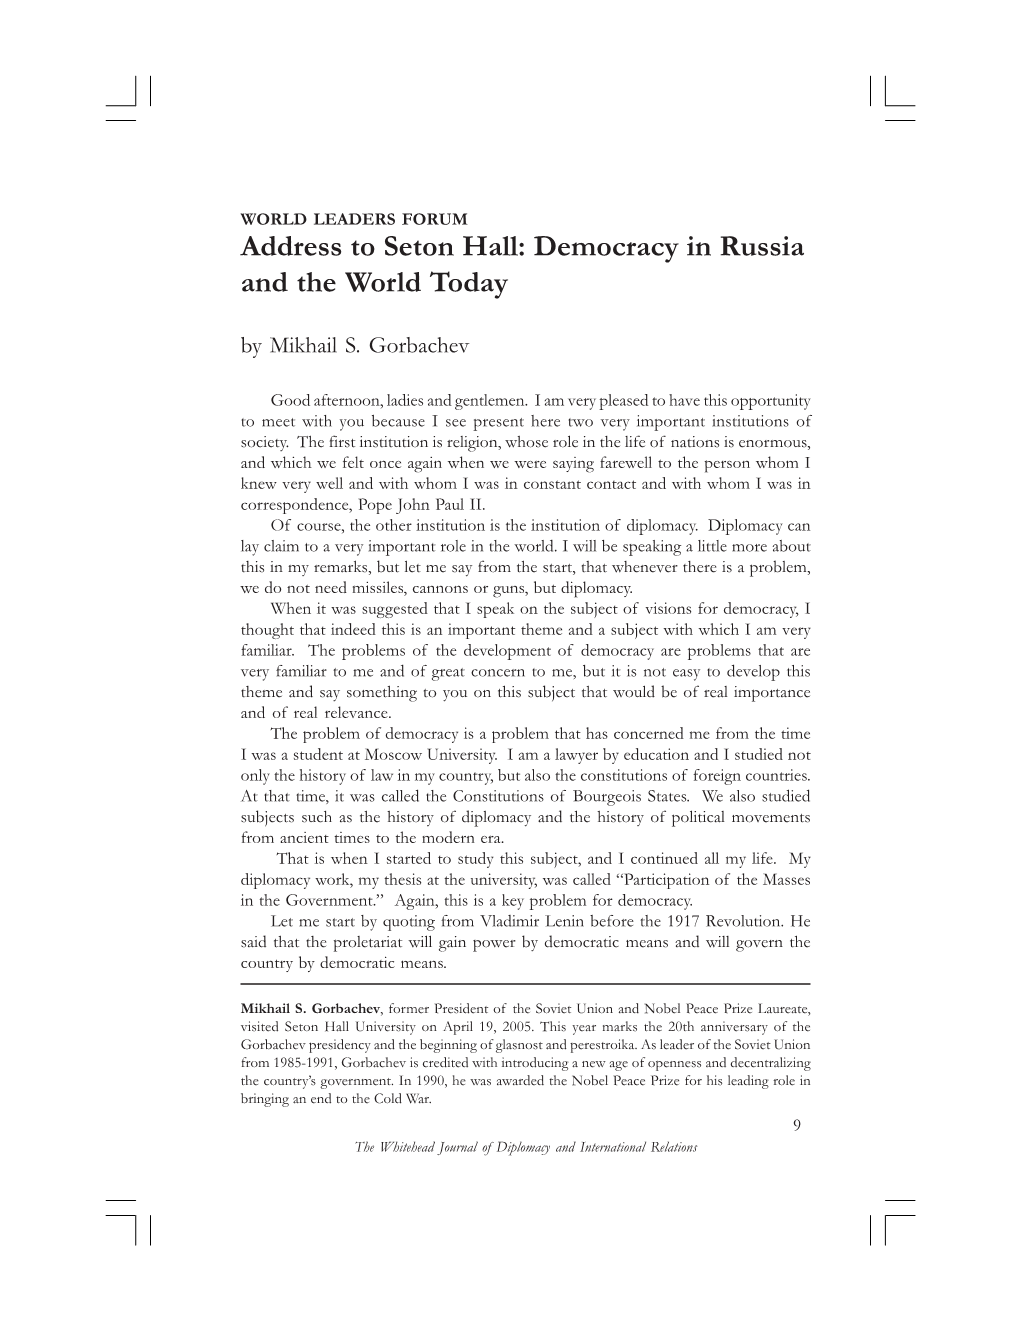 Democracy in Russia and the World Today by Mikhail S